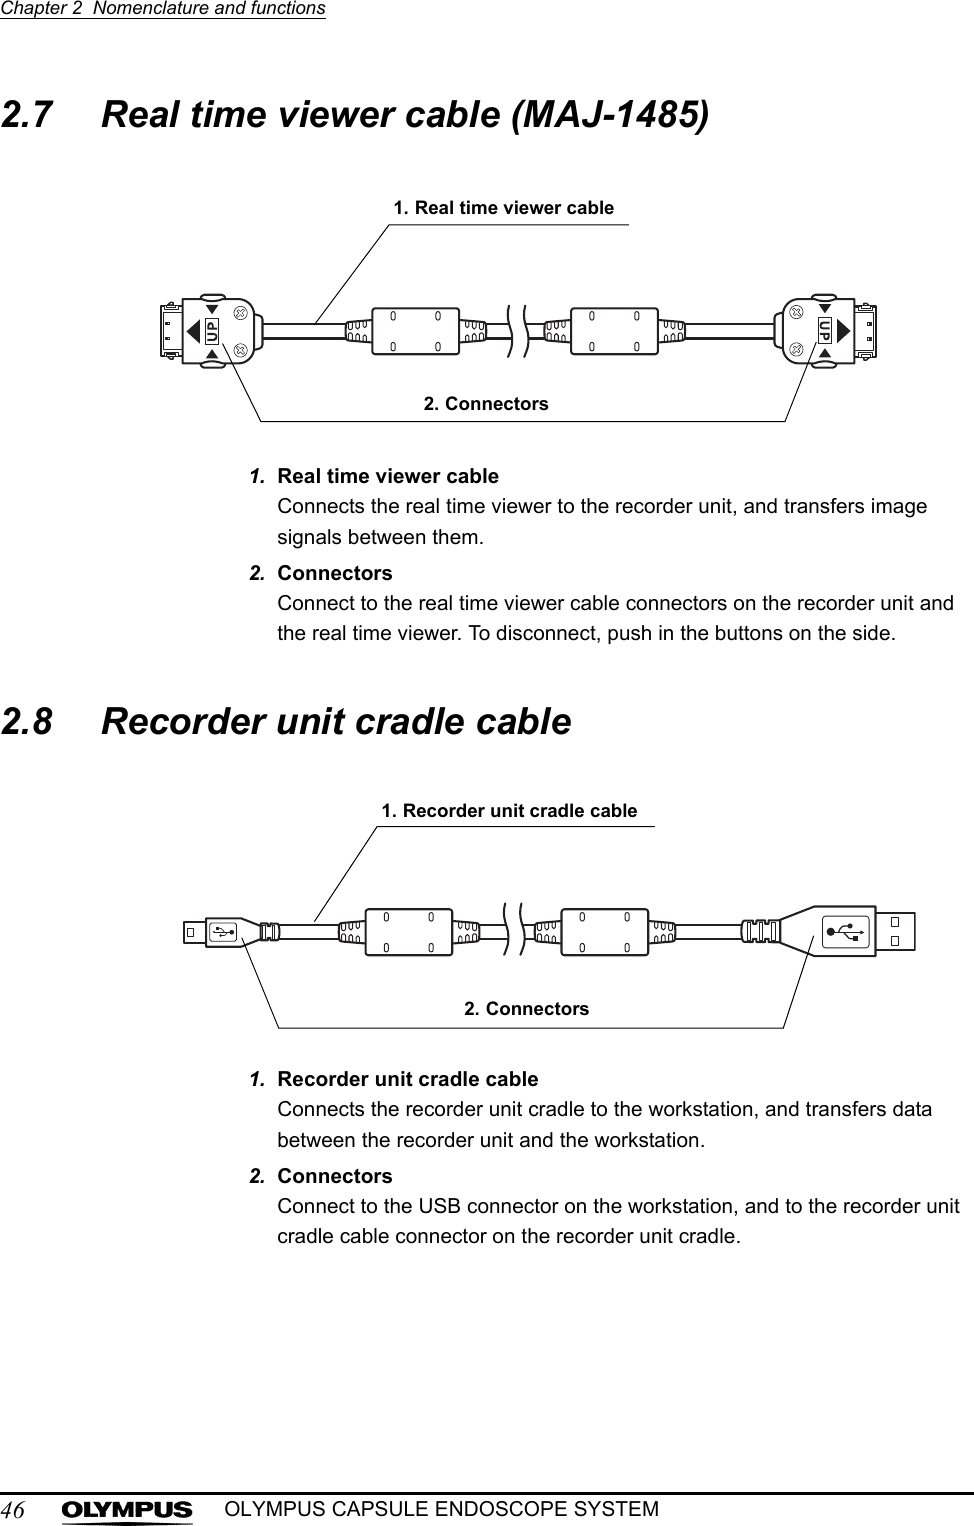 46Chapter 2  Nomenclature and functionsOLYMPUS CAPSULE ENDOSCOPE SYSTEM2.7 Real time viewer cable (MAJ-1485) 1. Real time viewer cableConnects the real time viewer to the recorder unit, and transfers image signals between them.2. ConnectorsConnect to the real time viewer cable connectors on the recorder unit and the real time viewer. To disconnect, push in the buttons on the side.2.8 Recorder unit cradle cable1. Recorder unit cradle cableConnects the recorder unit cradle to the workstation, and transfers data between the recorder unit and the workstation.2. ConnectorsConnect to the USB connector on the workstation, and to the recorder unit cradle cable connector on the recorder unit cradle.1. Real time viewer cable2. Connectors1. Recorder unit cradle cable2. Connectors